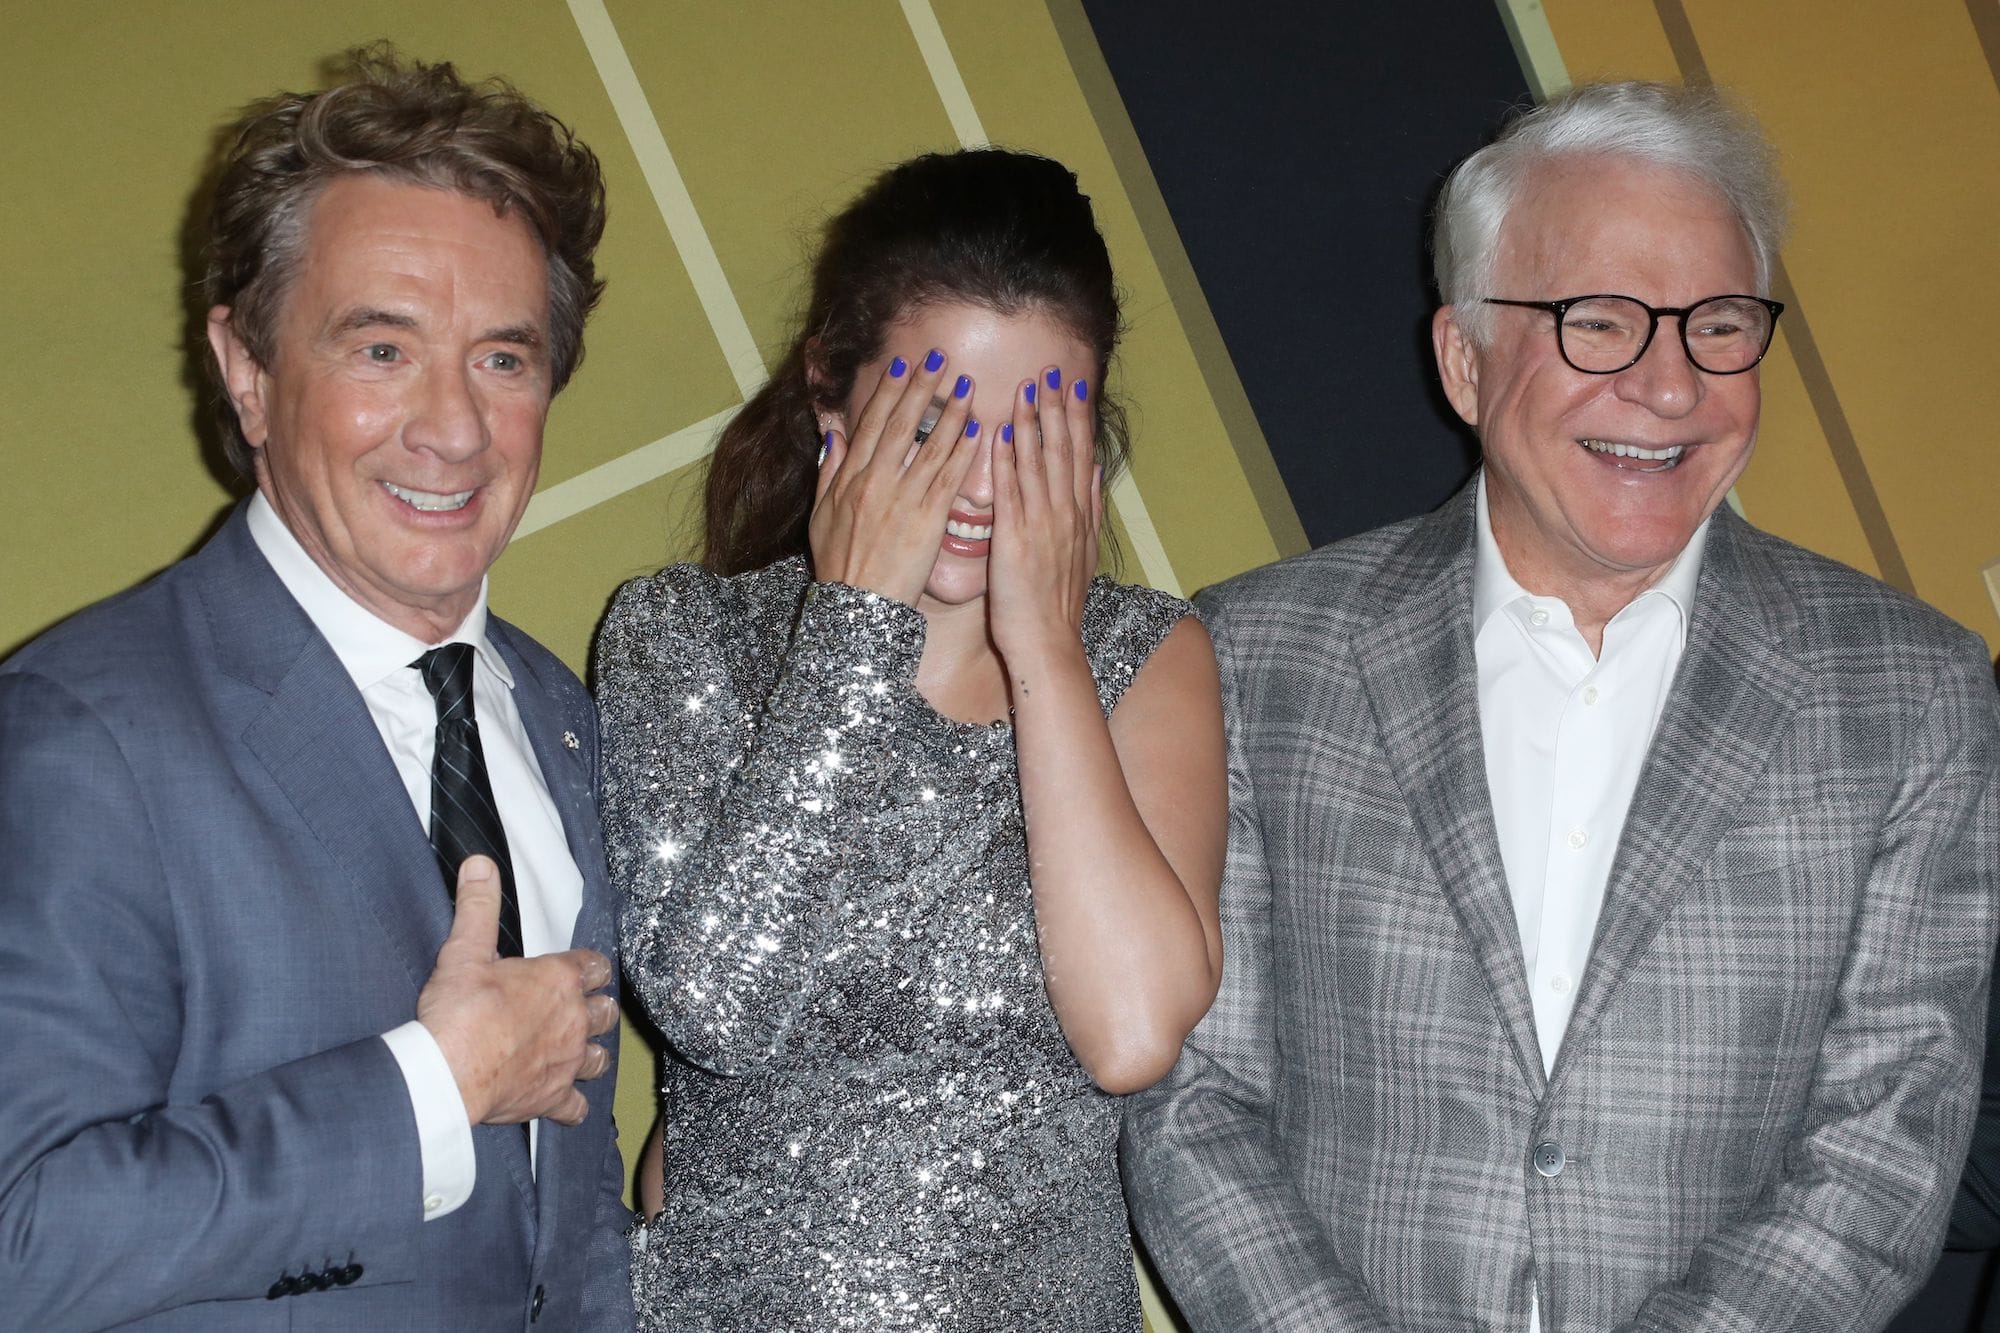 Selena Gomez having a fun moment with her co-stars Steve Martin and Martin Short on the red carpet.